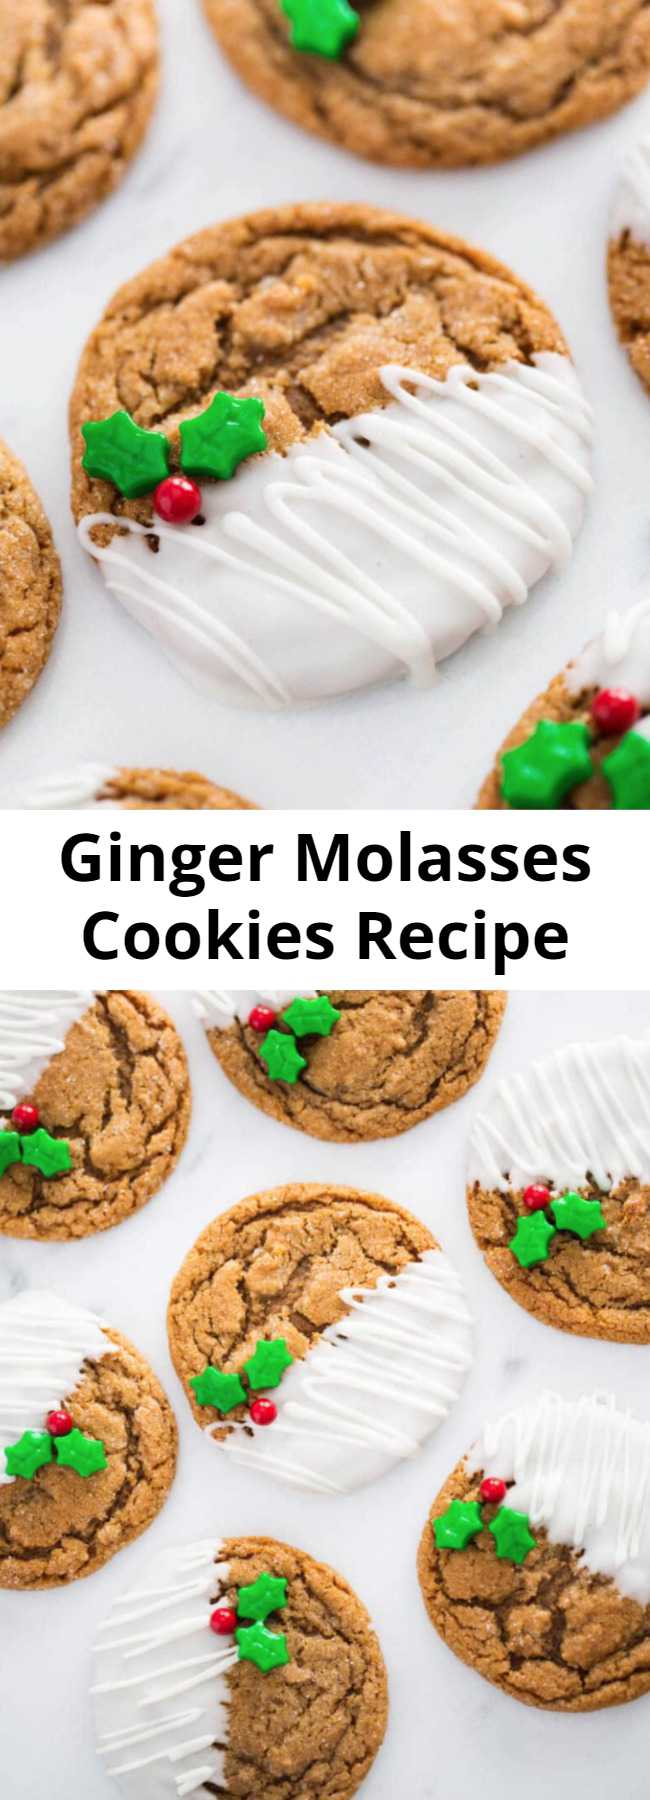 Ginger Molasses Cookies Recipe - Molasses cookies that are soft and chewy on the inside and crisp around the edges. Full of delicious ginger flavor and taste just like Christmas! Drizzle or dip in white chocolate for the ultimate holiday cookie! #cookies #cookierecipes #christmas #christmasrecipes #cookiedecorating #cookieart #recipe